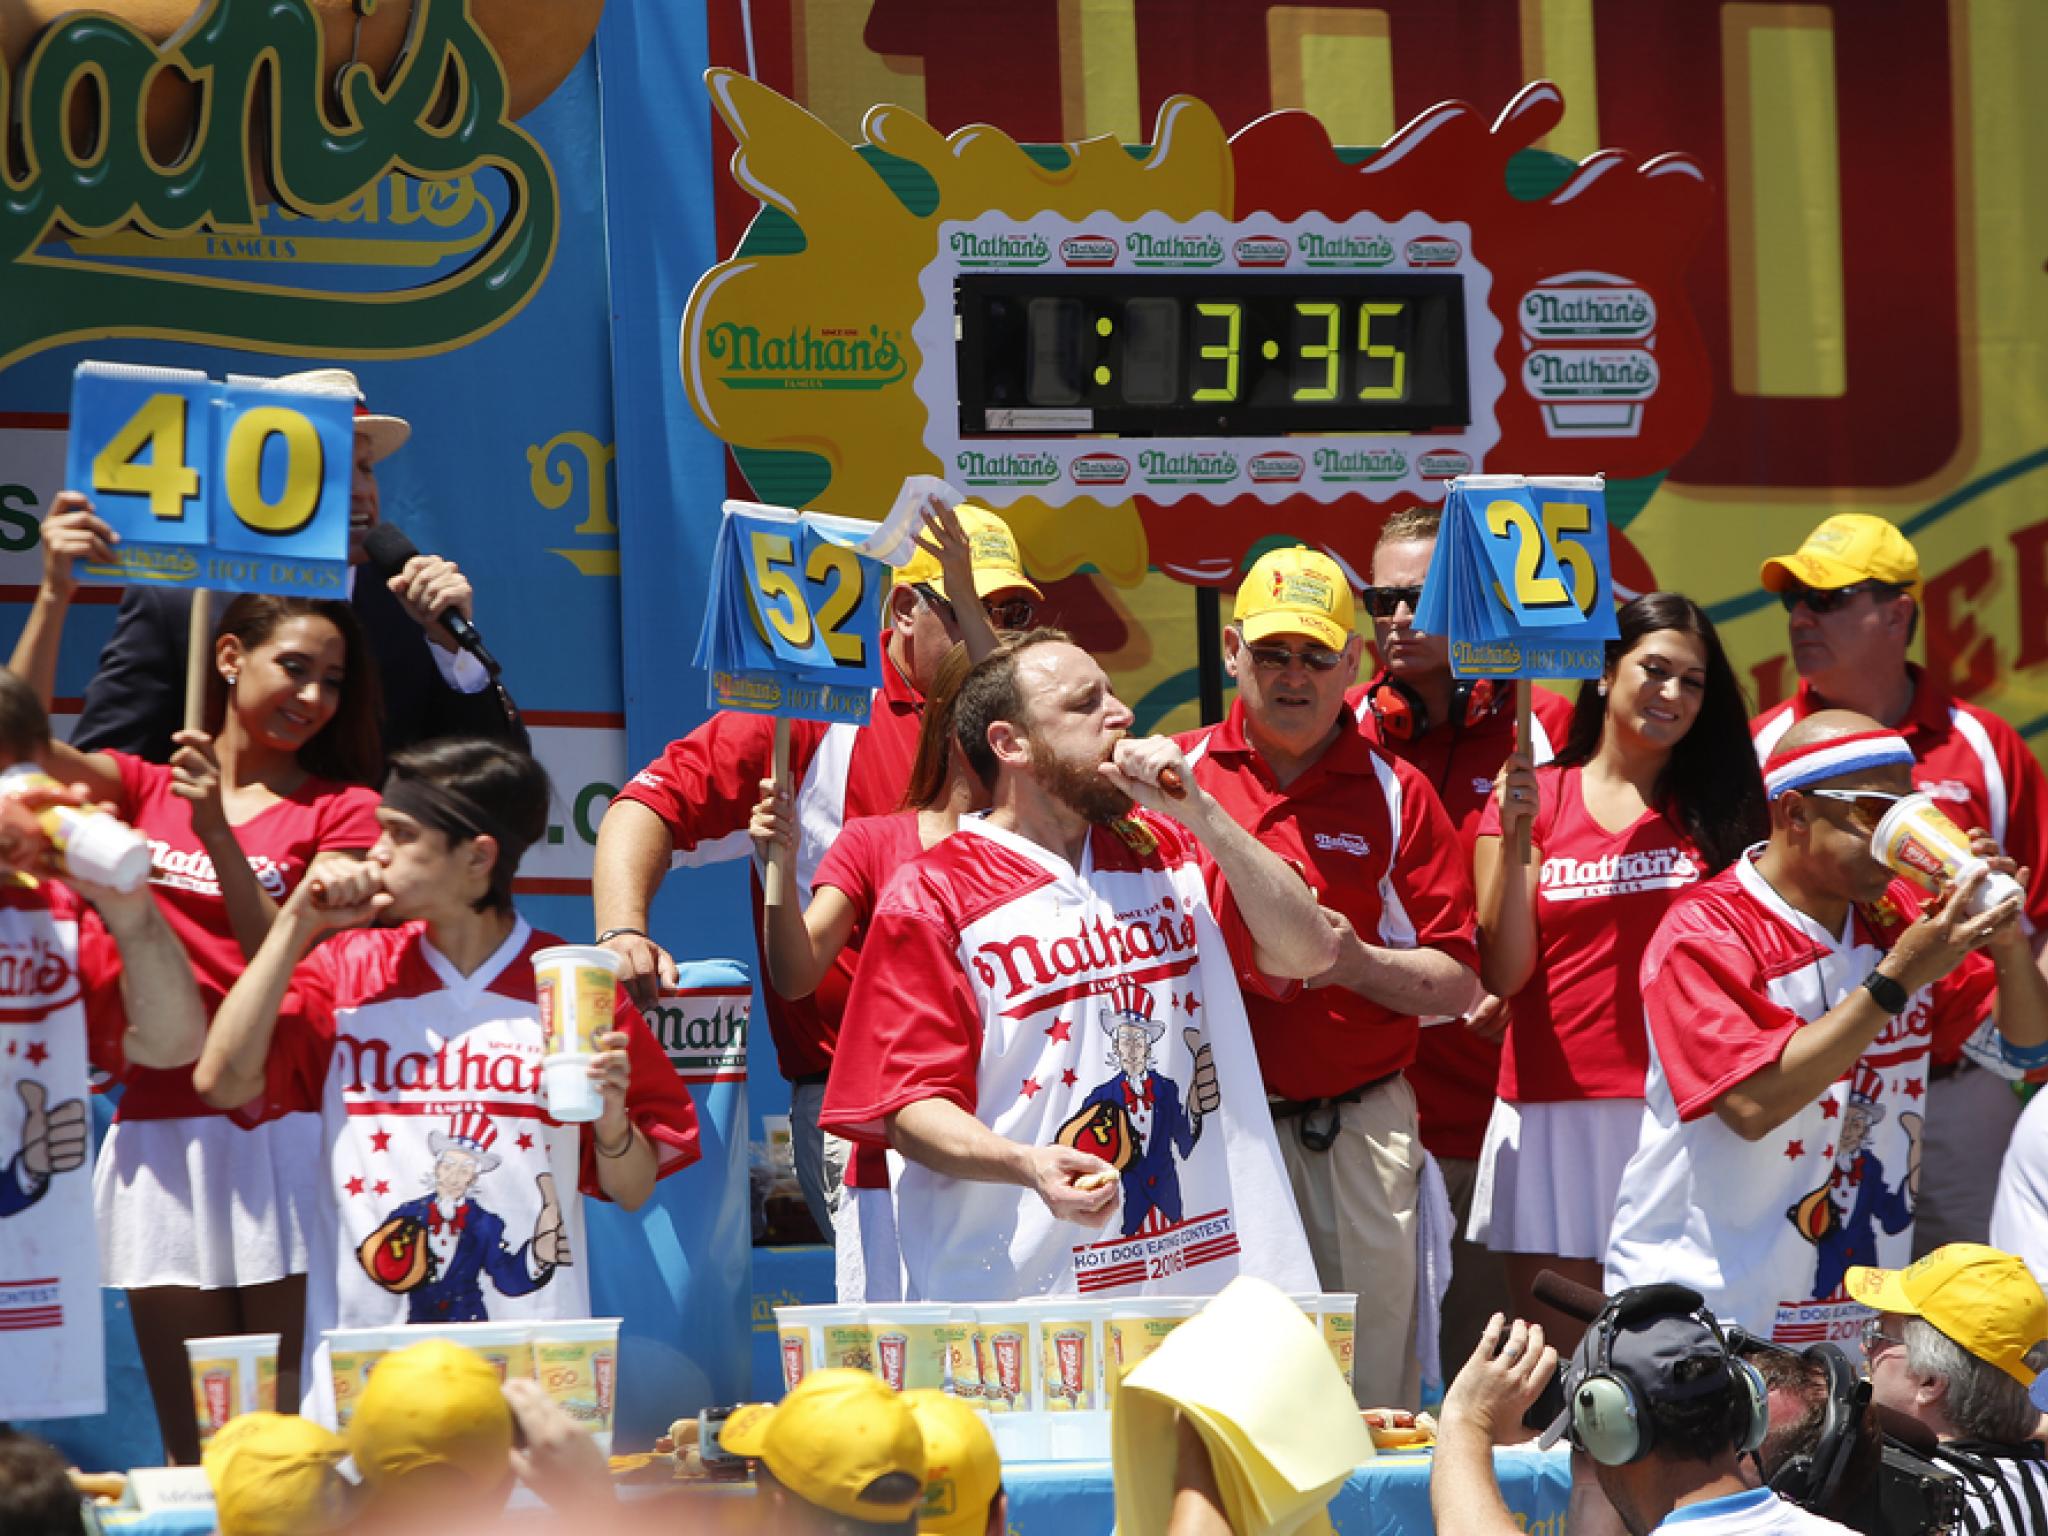  joey-chestnut-the-patriot-reigning-champ-shuns-chinese-backed-hot-dogs-for-impossible-american-ones 